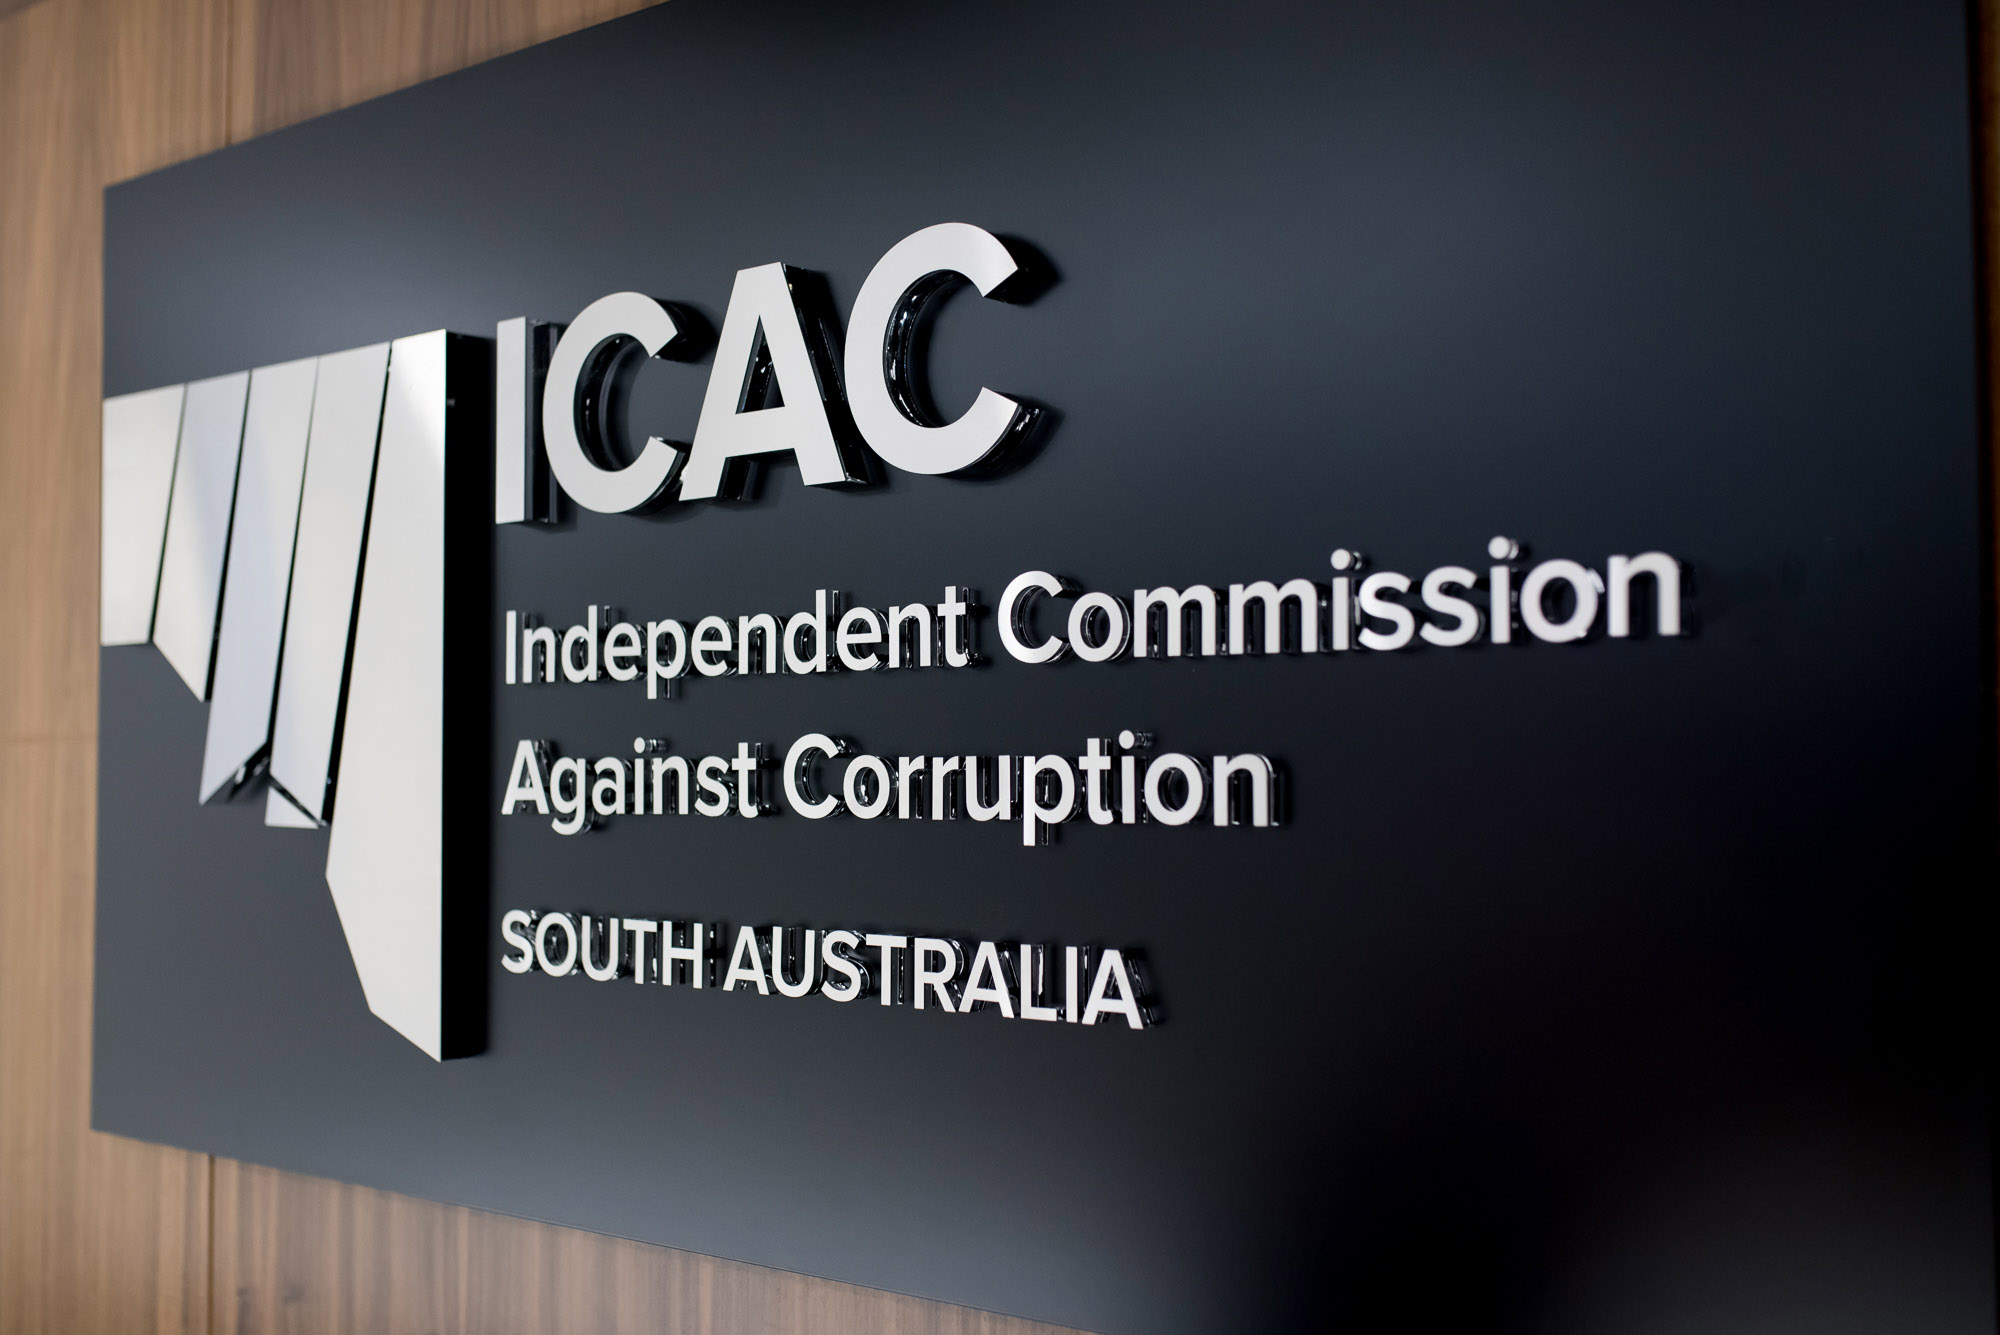 Photo of the Independent Commission Against Corruption logo from hearing room